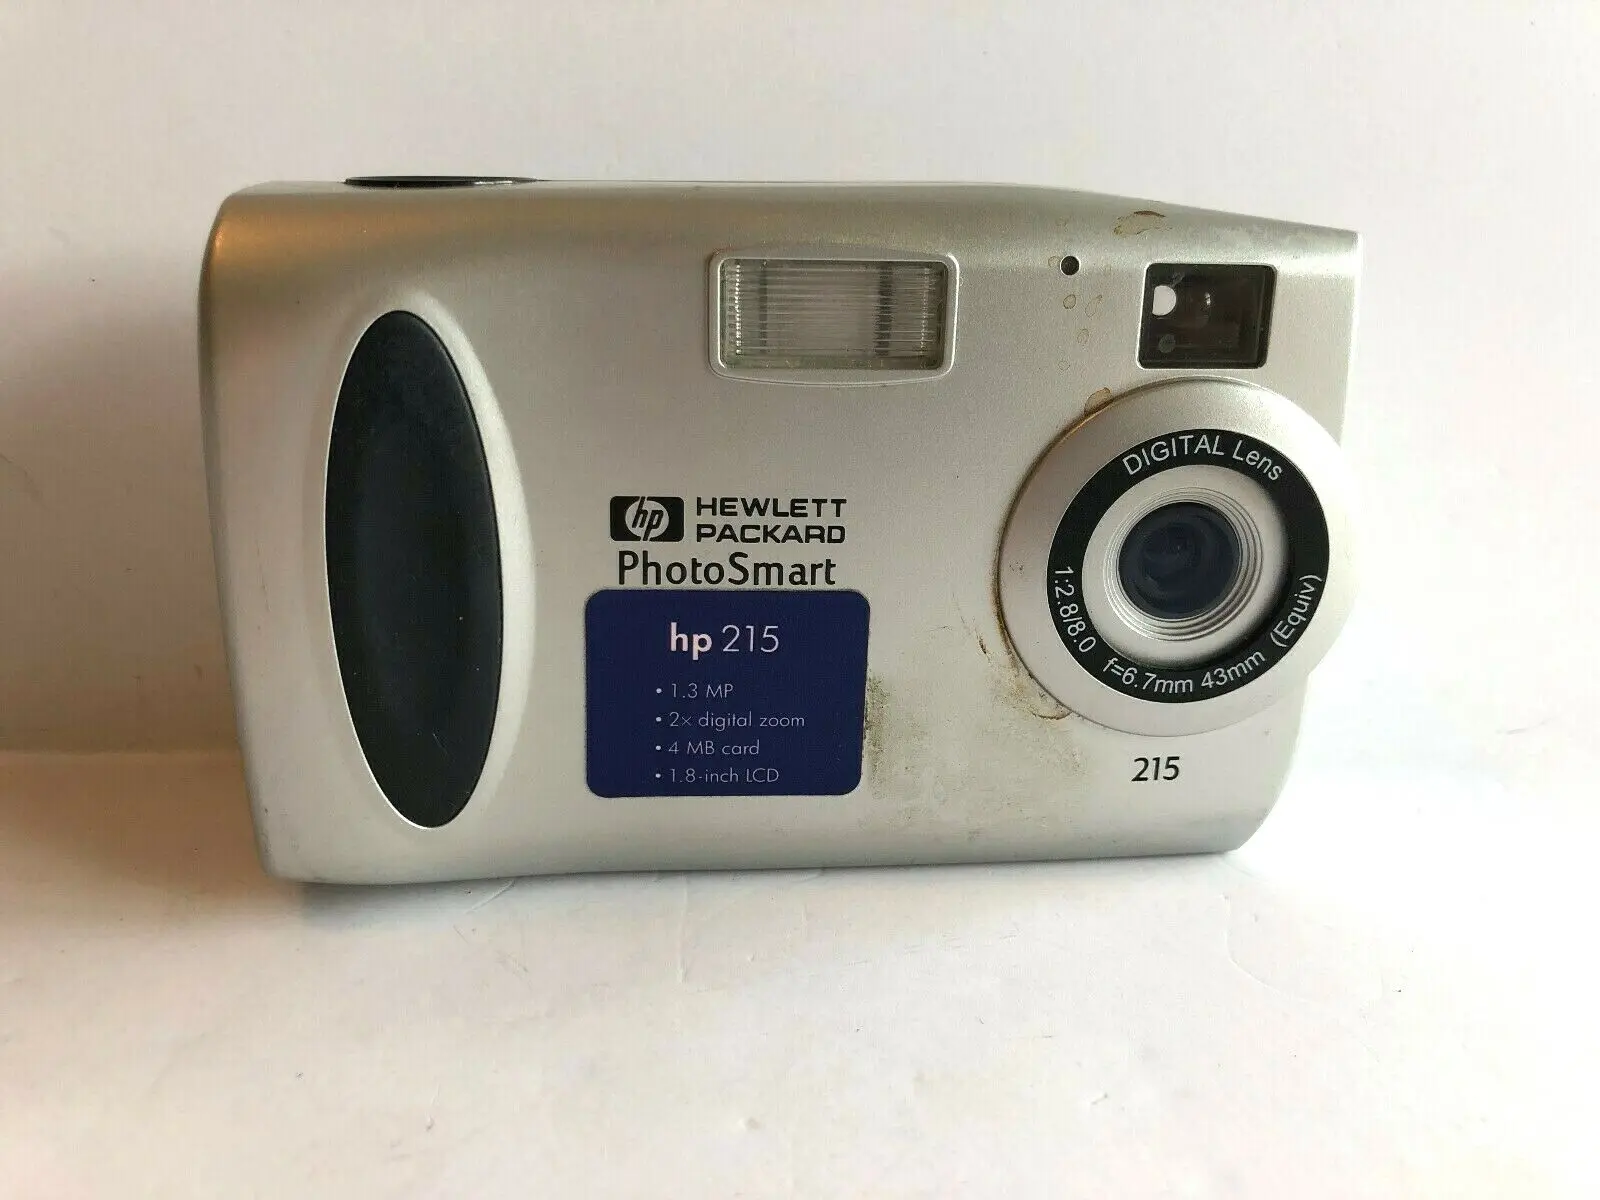 hewlett packard camera - Why is my HP camera not working